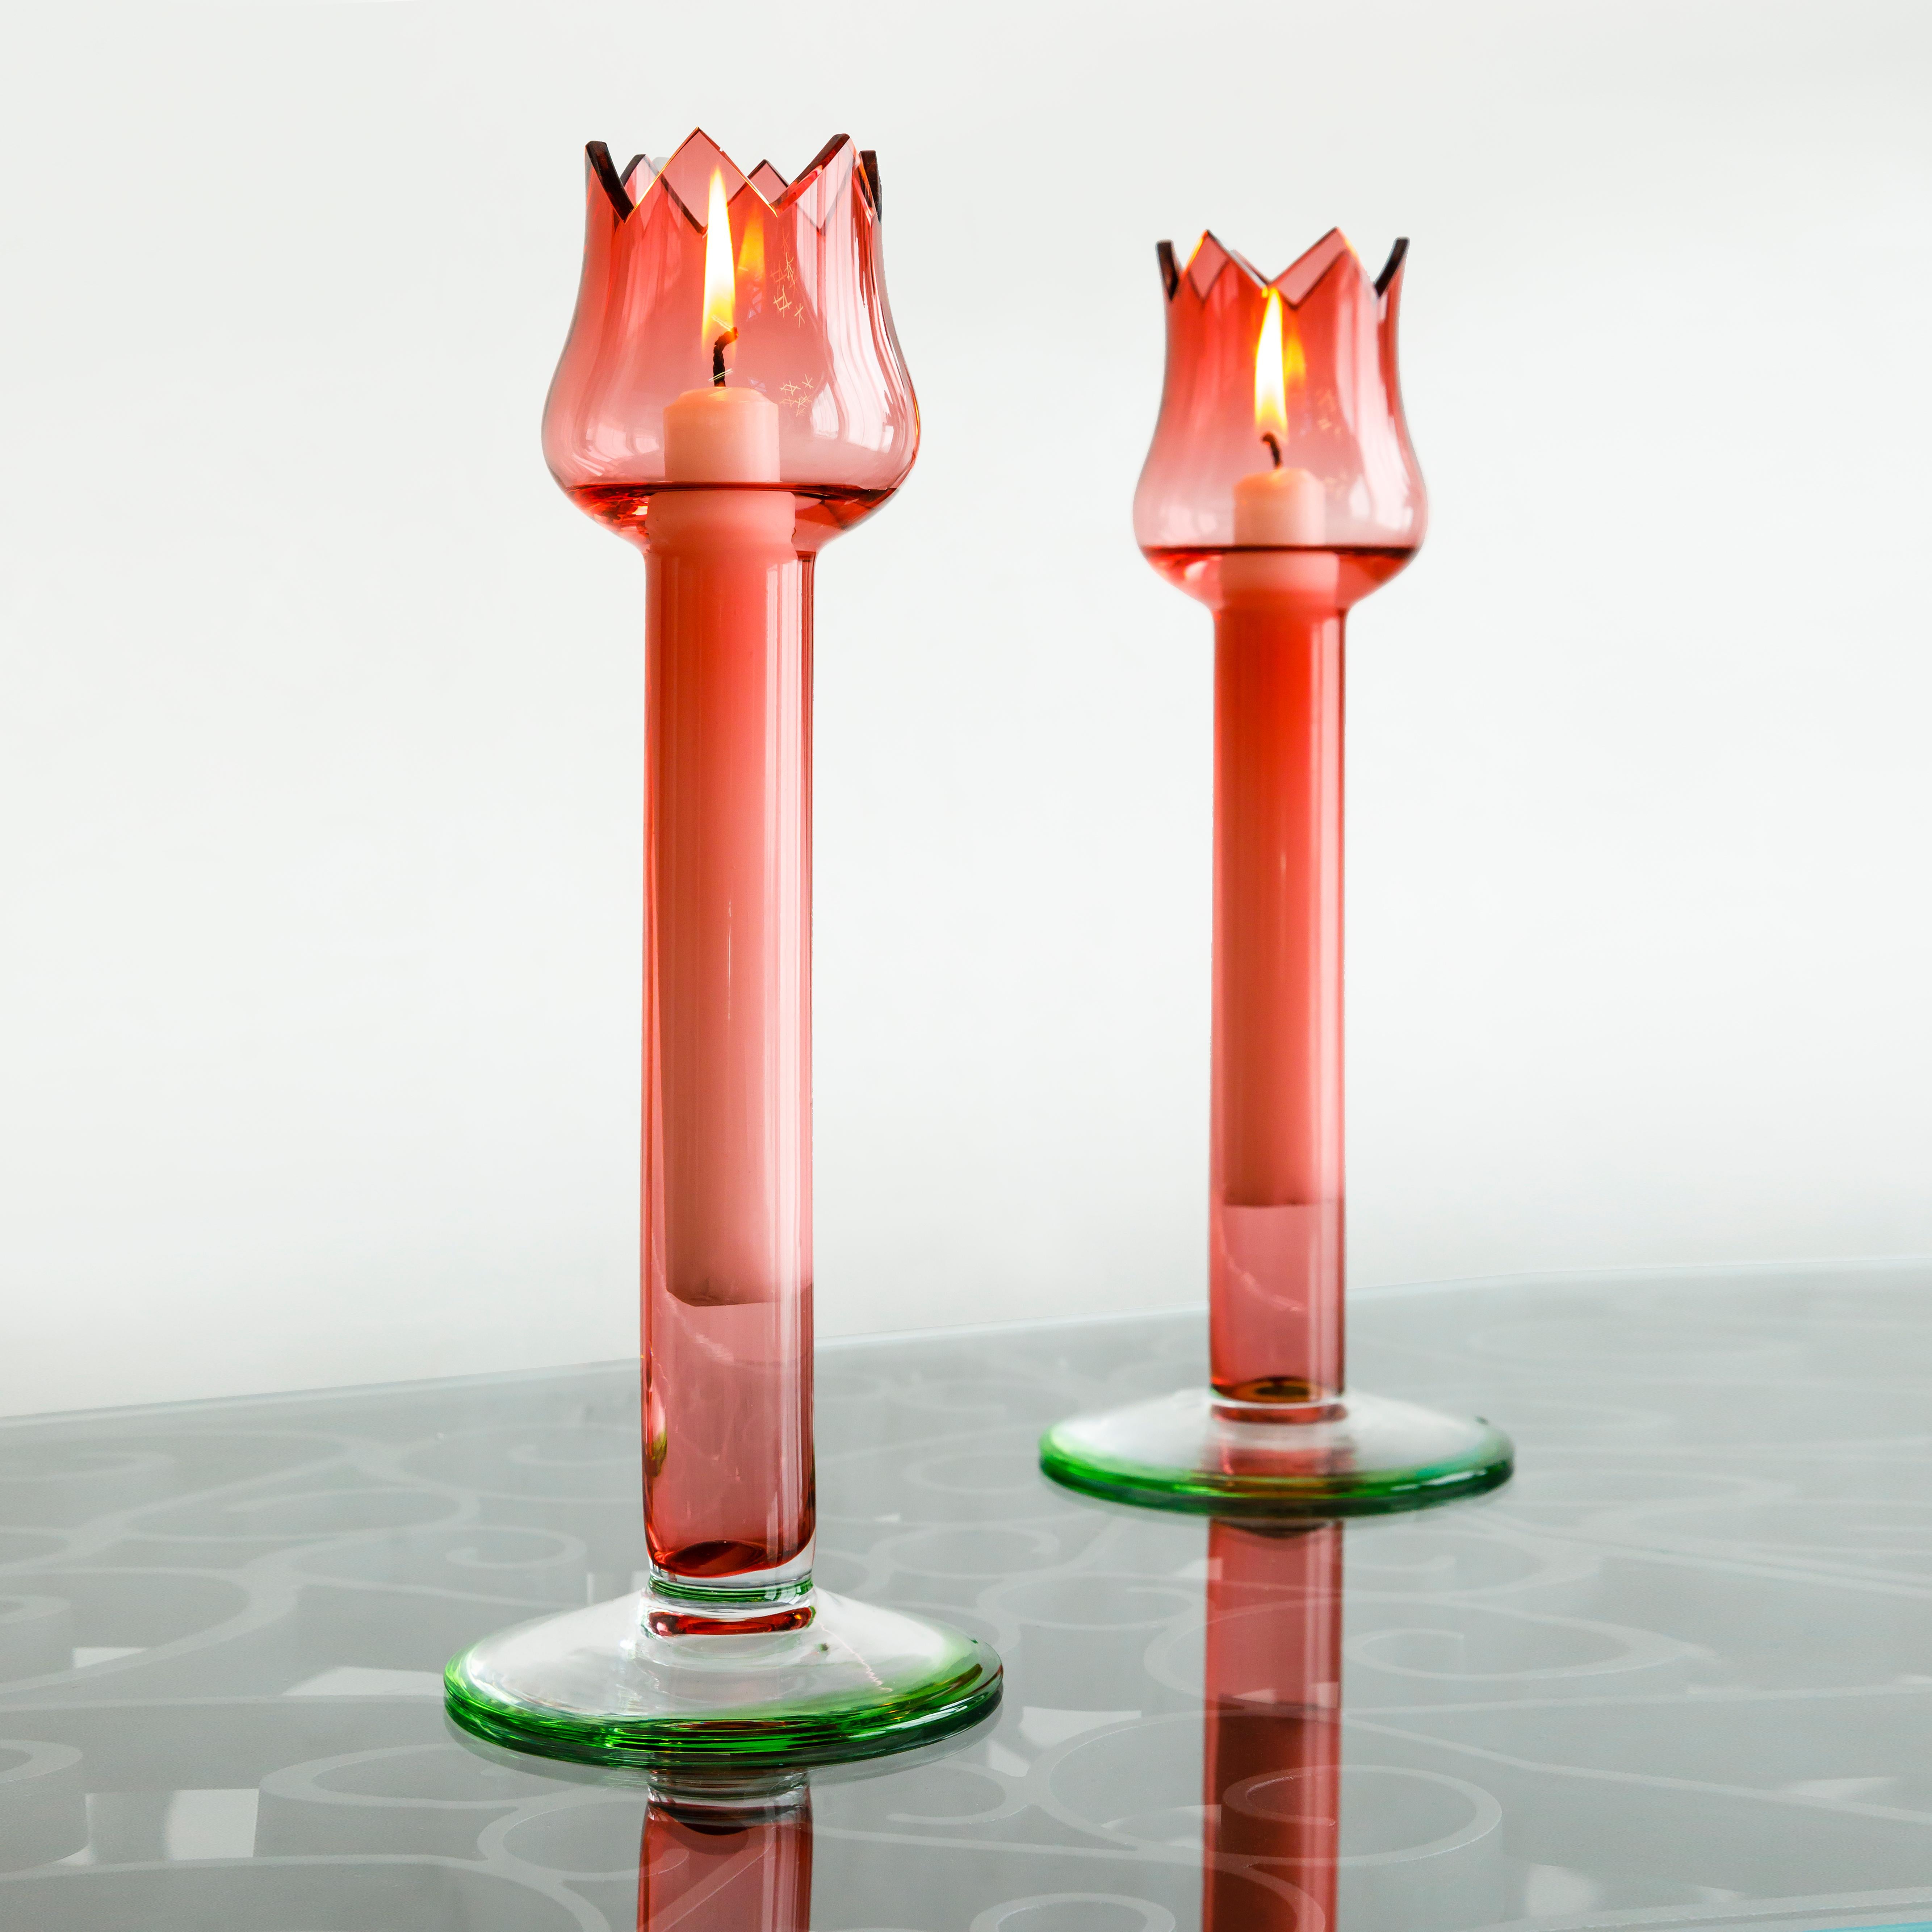 Set of 5 Red Tulip Glass Candleholders by Oscar Tusquets for Bd Barcelona 1